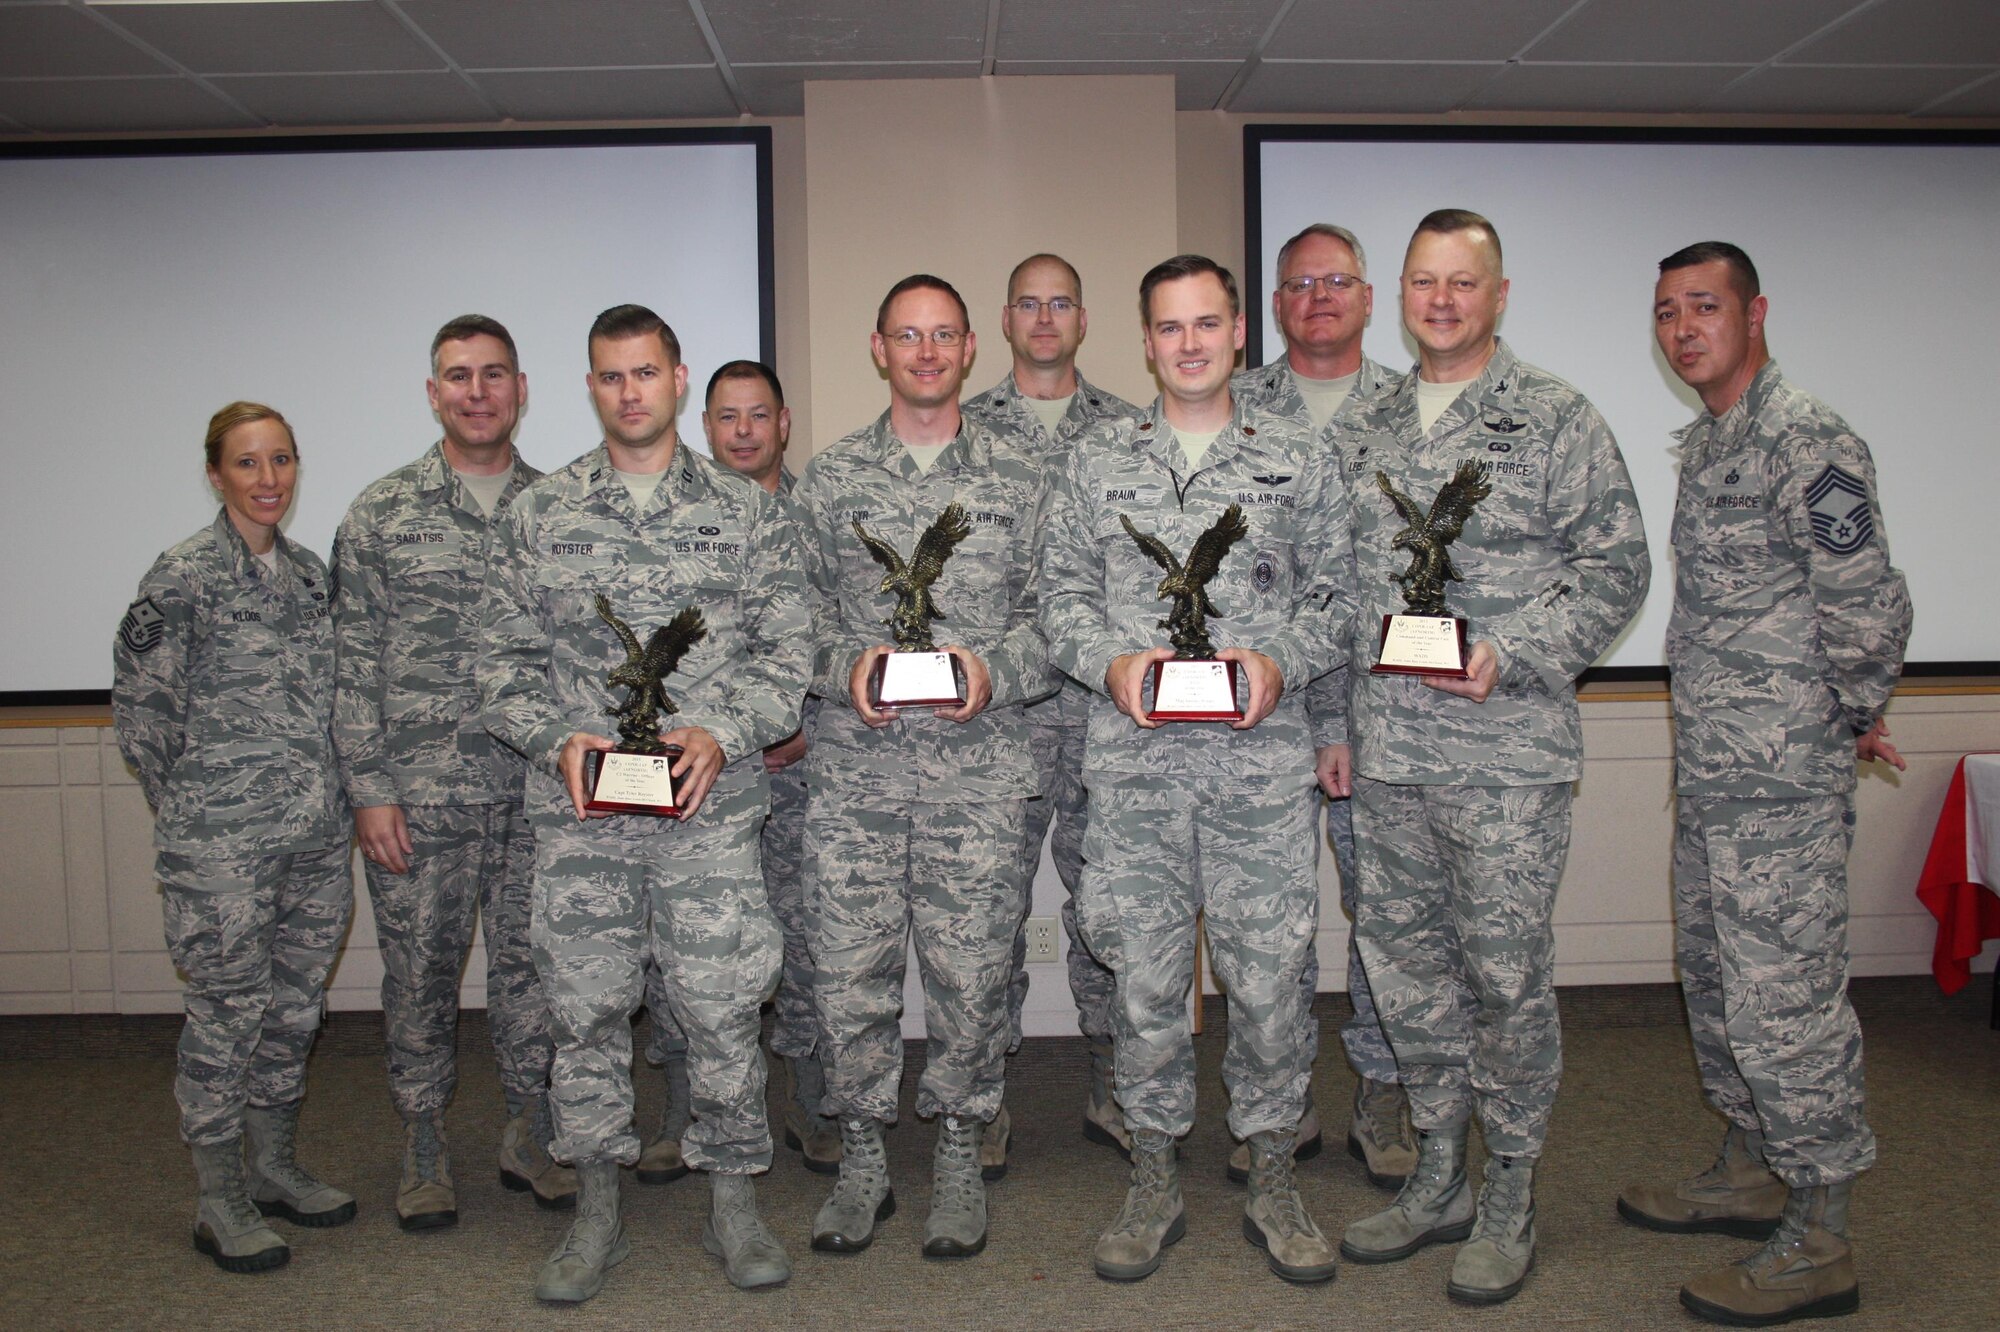 The Western Air Defense Sector wins First Air Force Command and Control Unit of the Year.  Individual unit members win the Field Grade Officer of the Year, Command and Control (C2) Officer Warrior of the Year, and C2 Enlisted Warrior of the Year.  Pictured from left to right are: Master Sgt. Dawn Kloos, 225th Air Defense Group (ADG) first sergeant; Chief Master Sgt. George Saratsis, First Air Force awards presenter; Capt. Tyler Royster, C2 Officer Warrior of the Year; Chief Master Sgt. Daniel Rebstock, 225th Support Squadron superintendent, Tech. Sgt. Ryc Cyr, C2 Enlisted Warrior of the Year; Lt. Col. Brett Bosselmann, 225th Air Defense Group commander; Maj. Antony Braun, Field Grade Officer of the Year; Col. William Krueger, 225th ADG commander; Col. Gregor Leist, Western Air Defense Sector commander; and Chief Master Sgt. Allan Lawson, 225th ADS superintendent.  